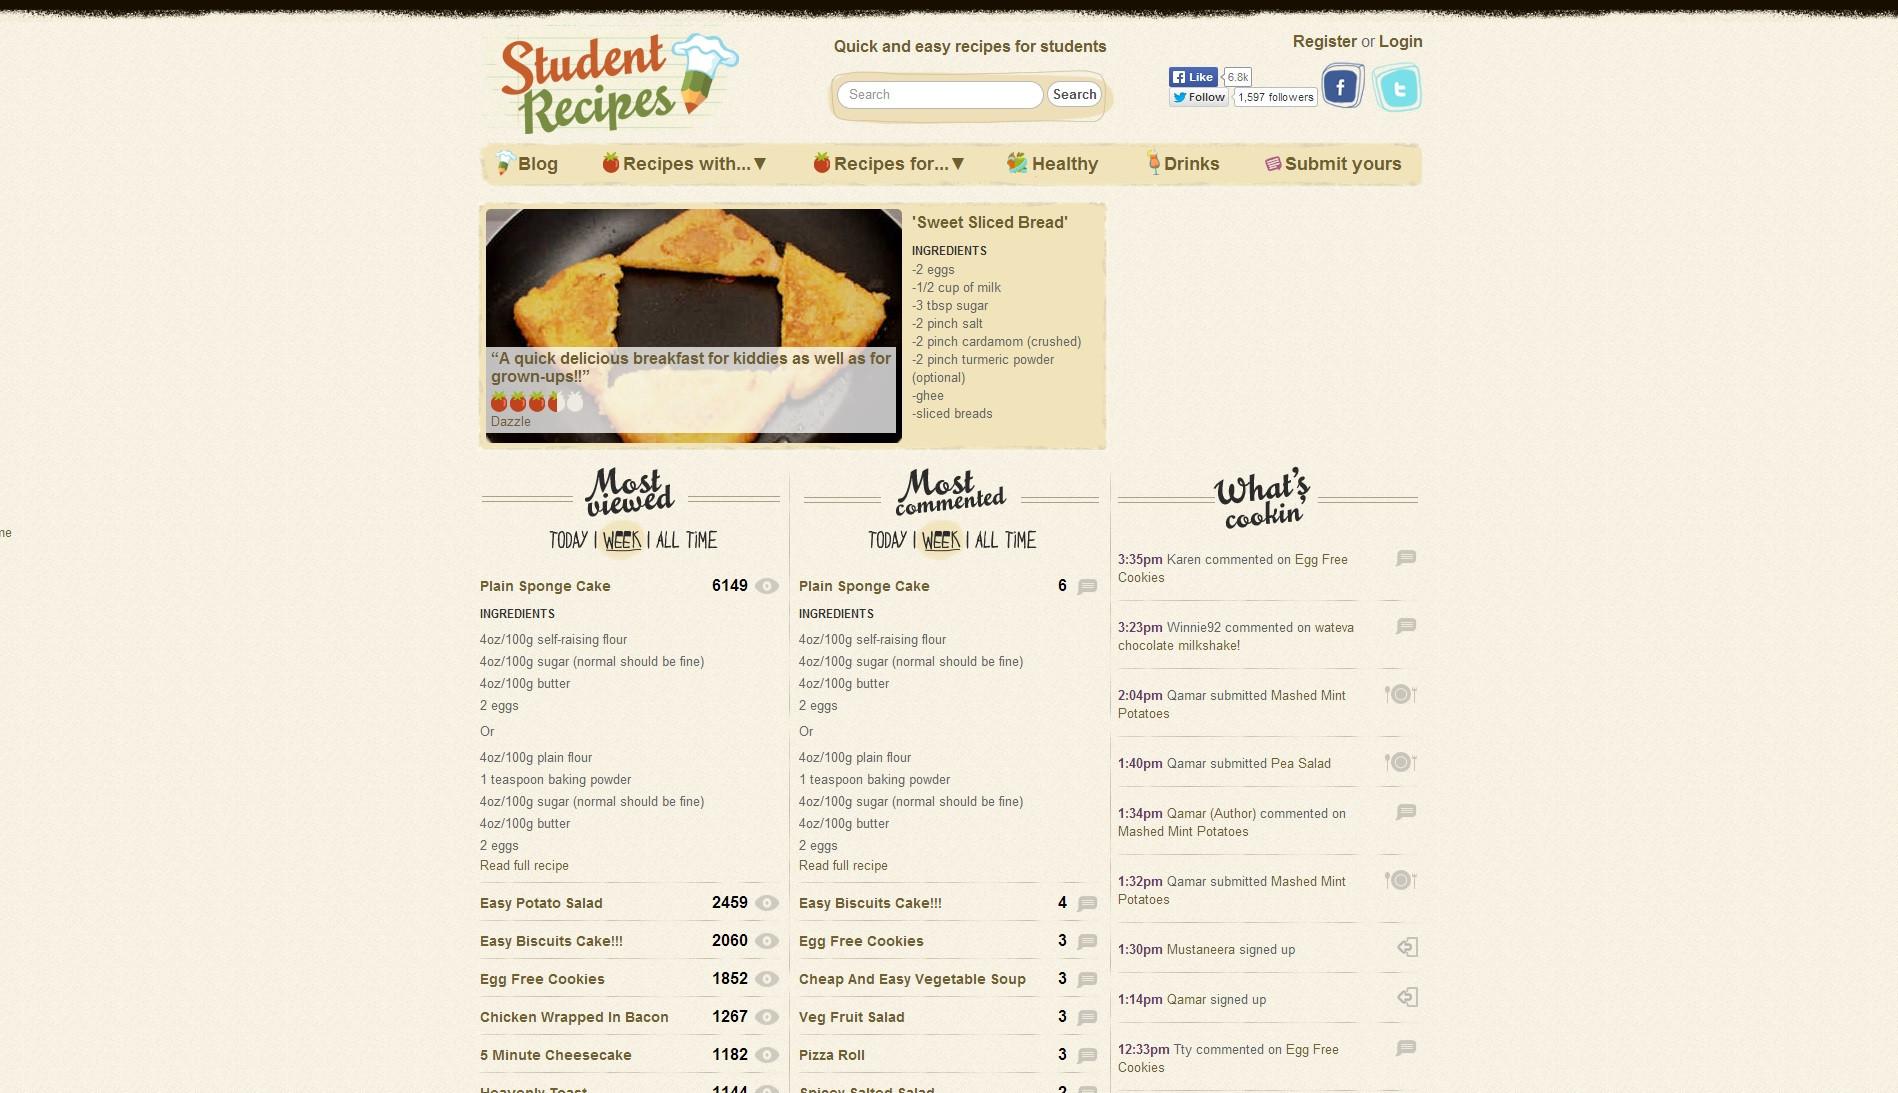 <a href="http://www.studentrecipes.com" target="_blank">studentrecipes.com</a> - Quick, easy, cheap and healthy recipes for students.